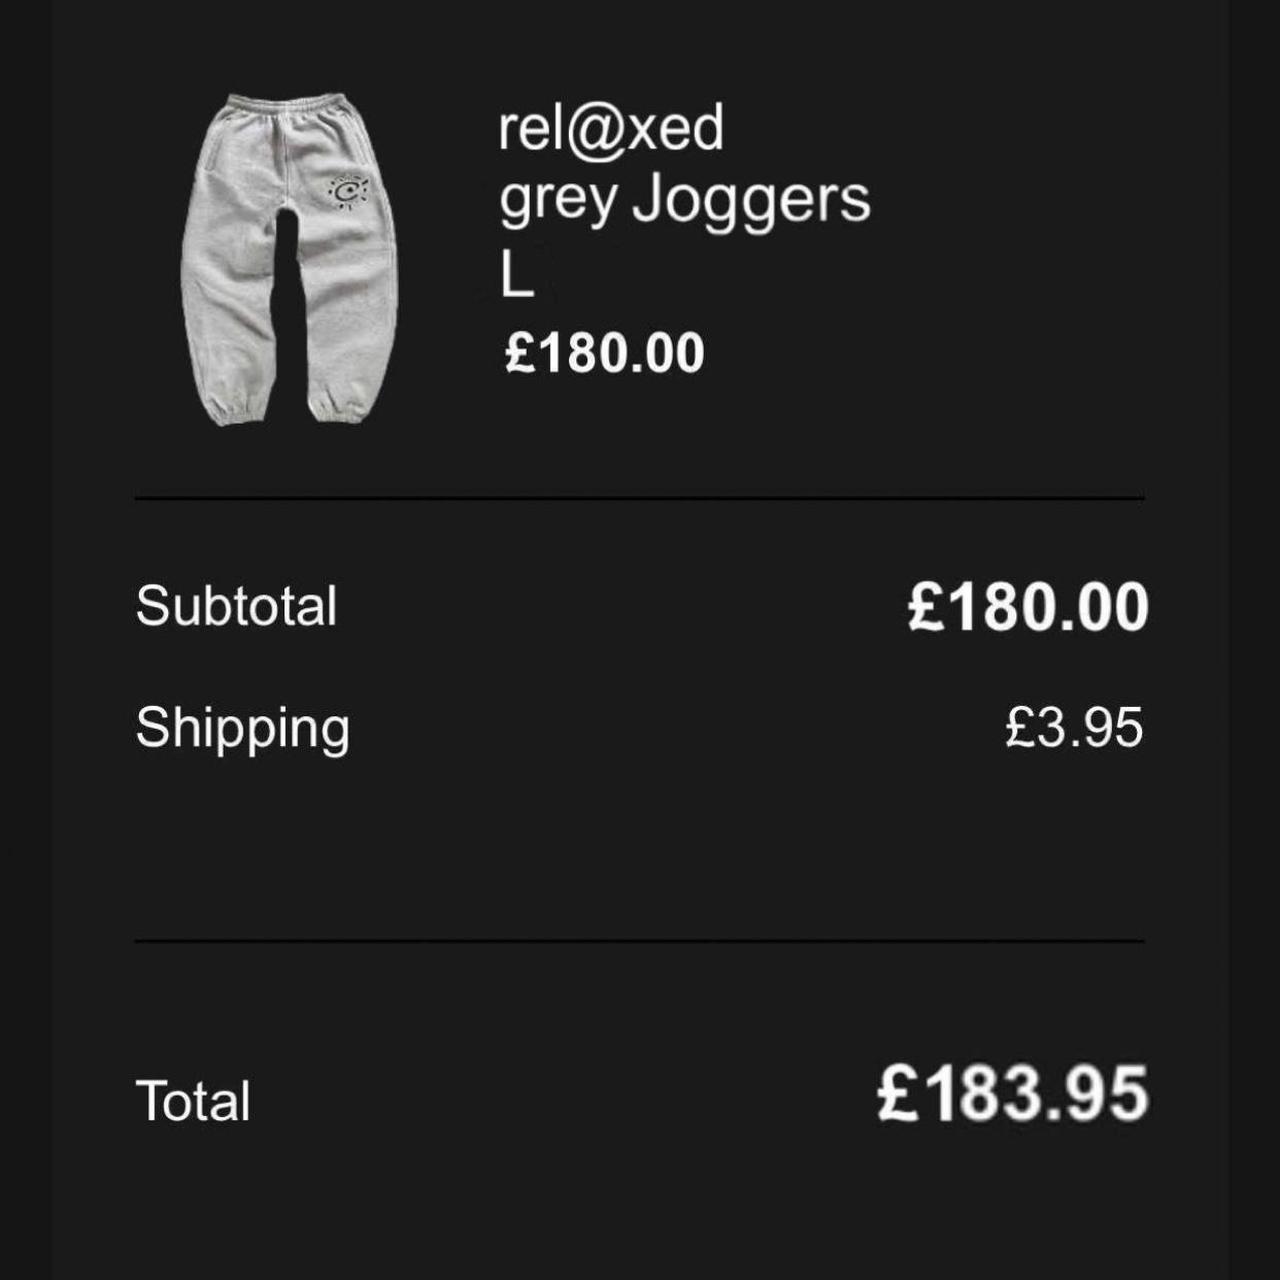 rel@xed black jogger – always do what you should do